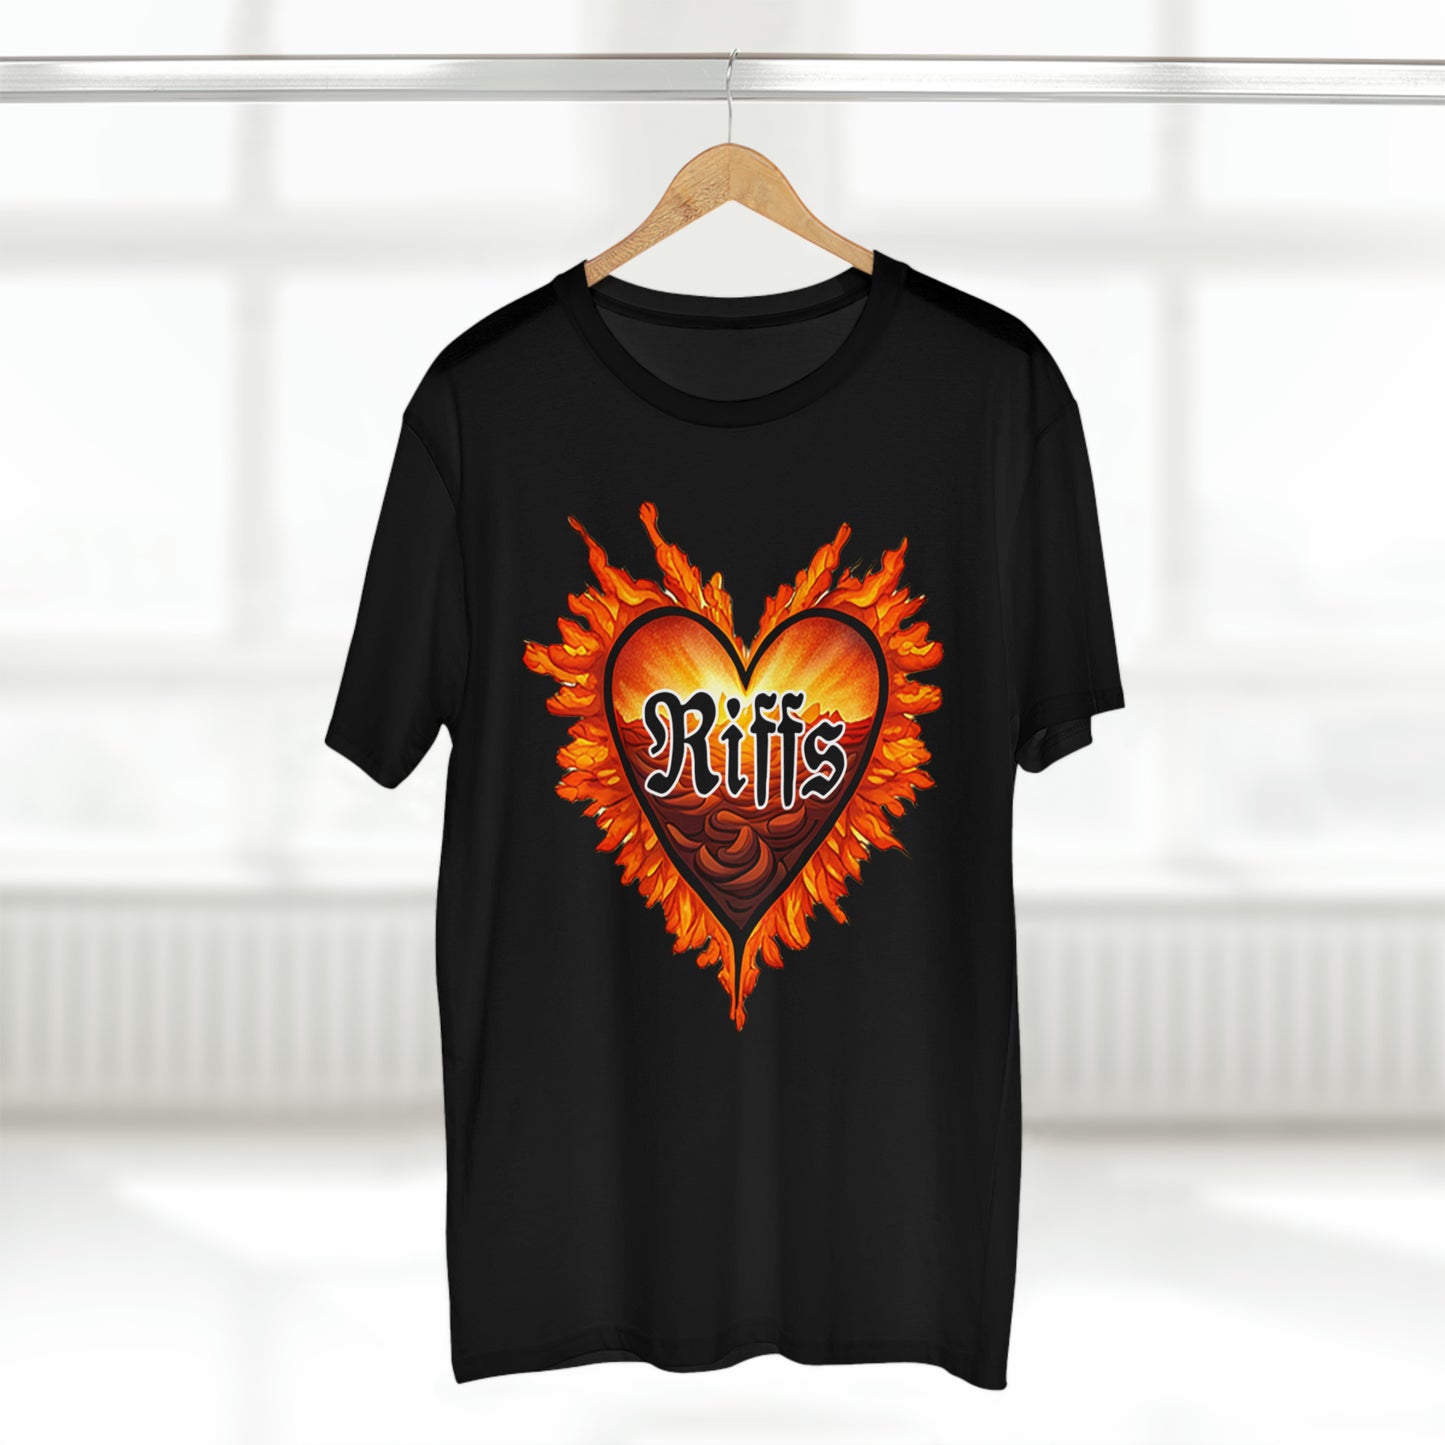 For the love of Riffs Tee (Double Sided)